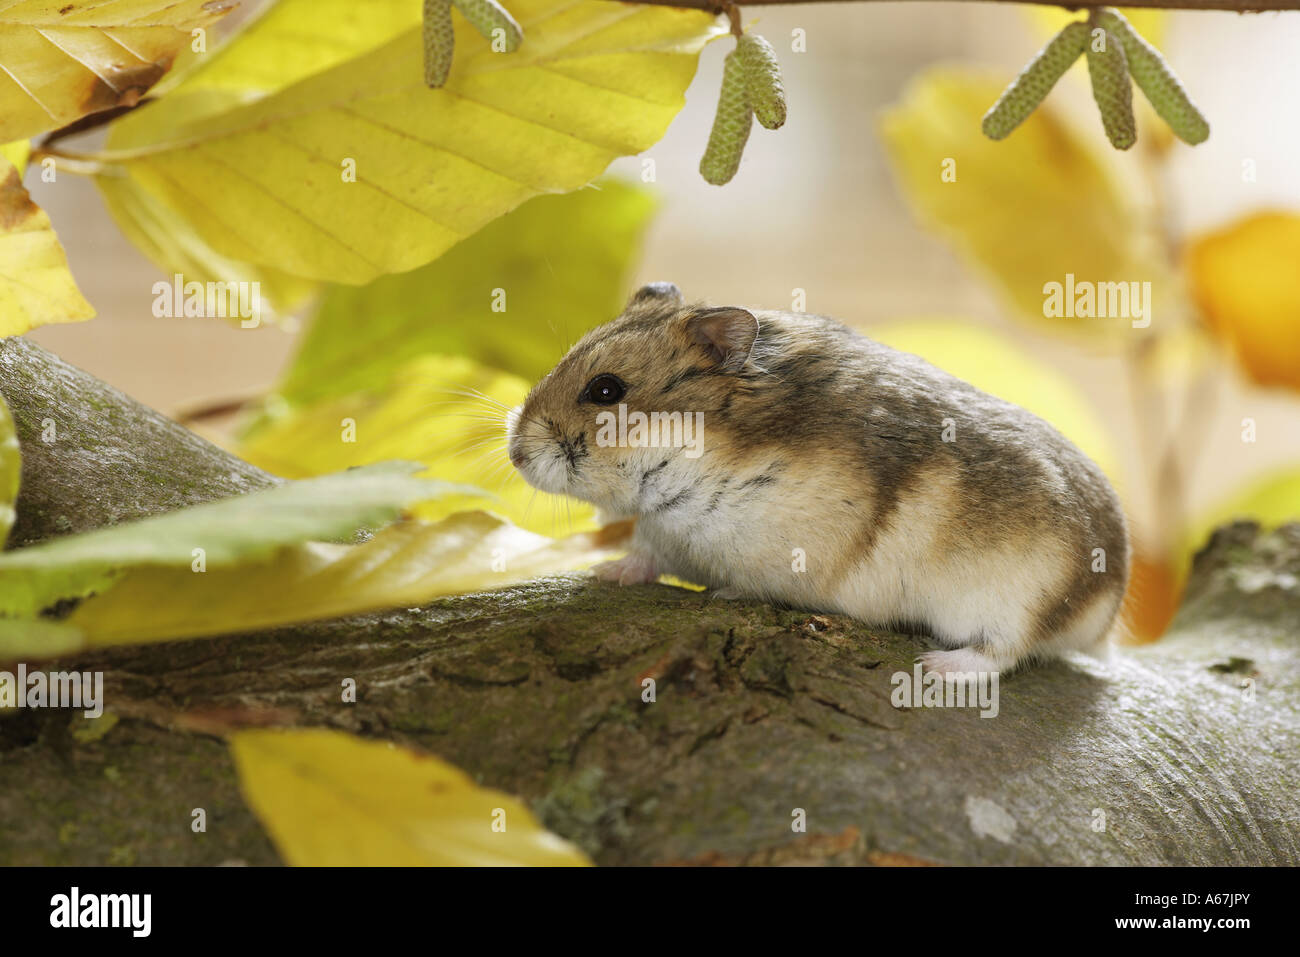 Two Campbell dwarf hamster eating peanuts on moss-covered ground. This  rodent has the scientific name Phodopus campbelli. Nature Stock Photos